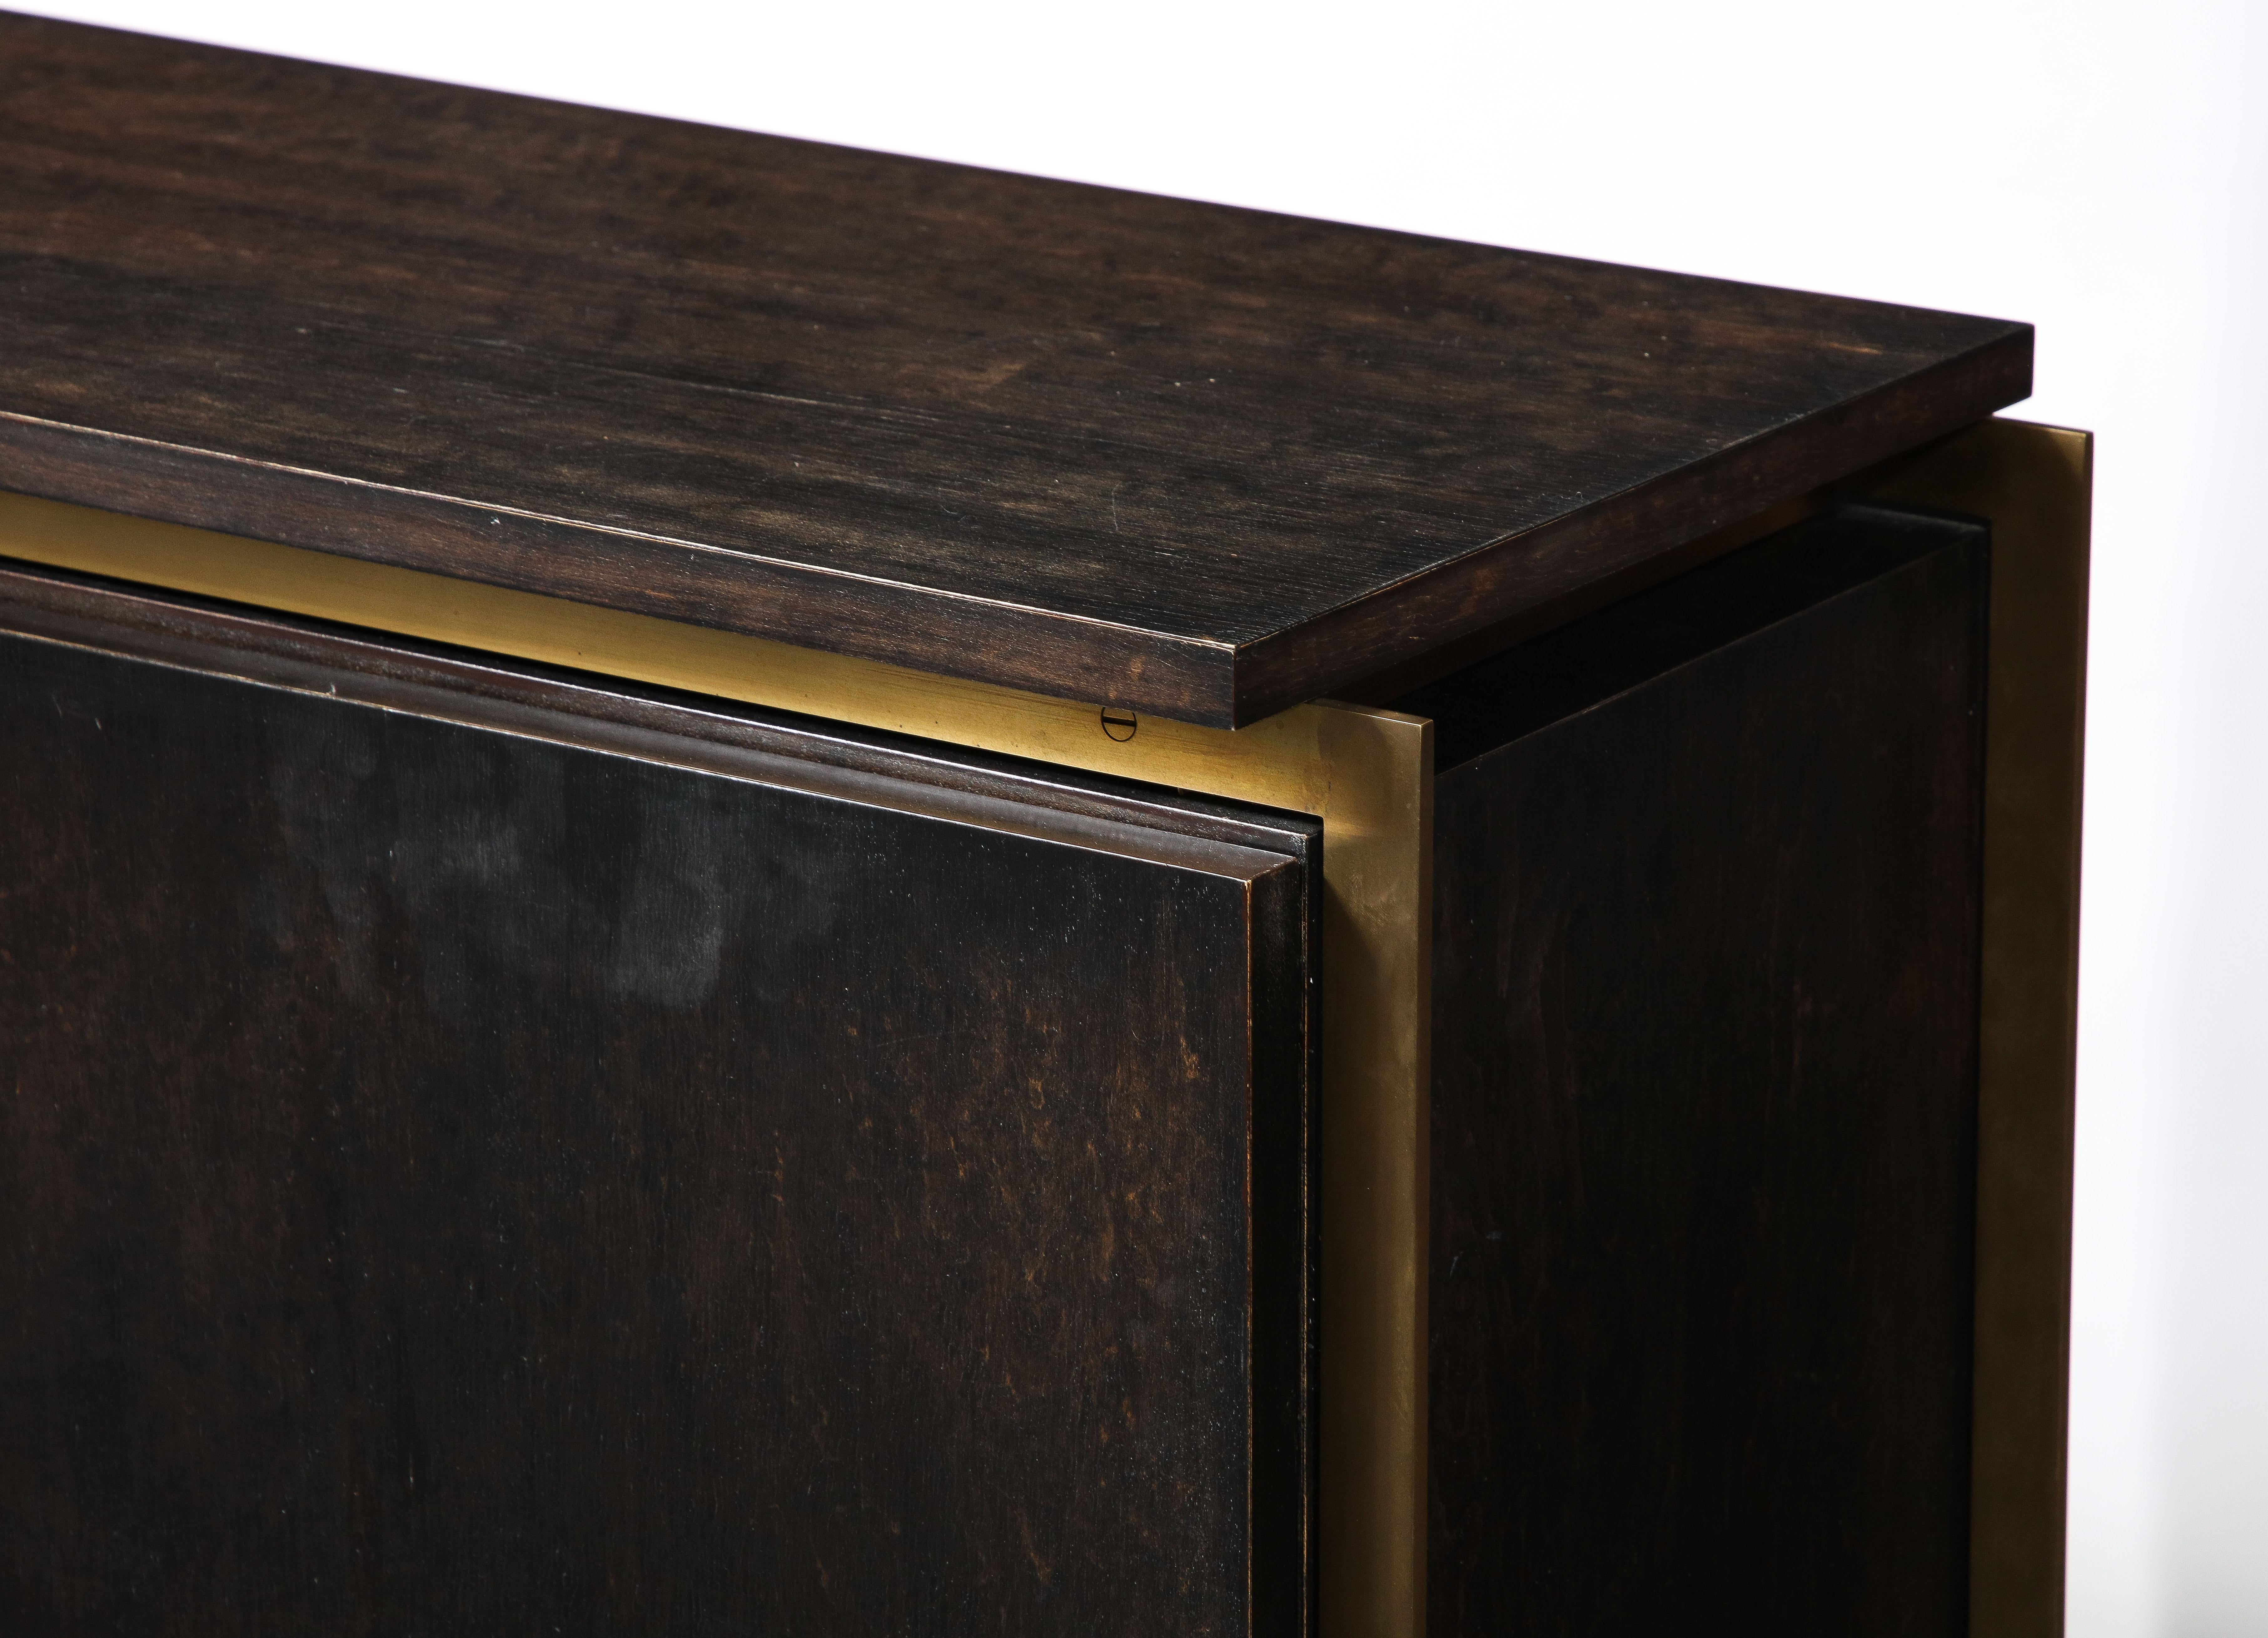 Contemporary Billy Cotton Modernist Credenza in Brass, Dark Wood and Lacquer, USA 2014